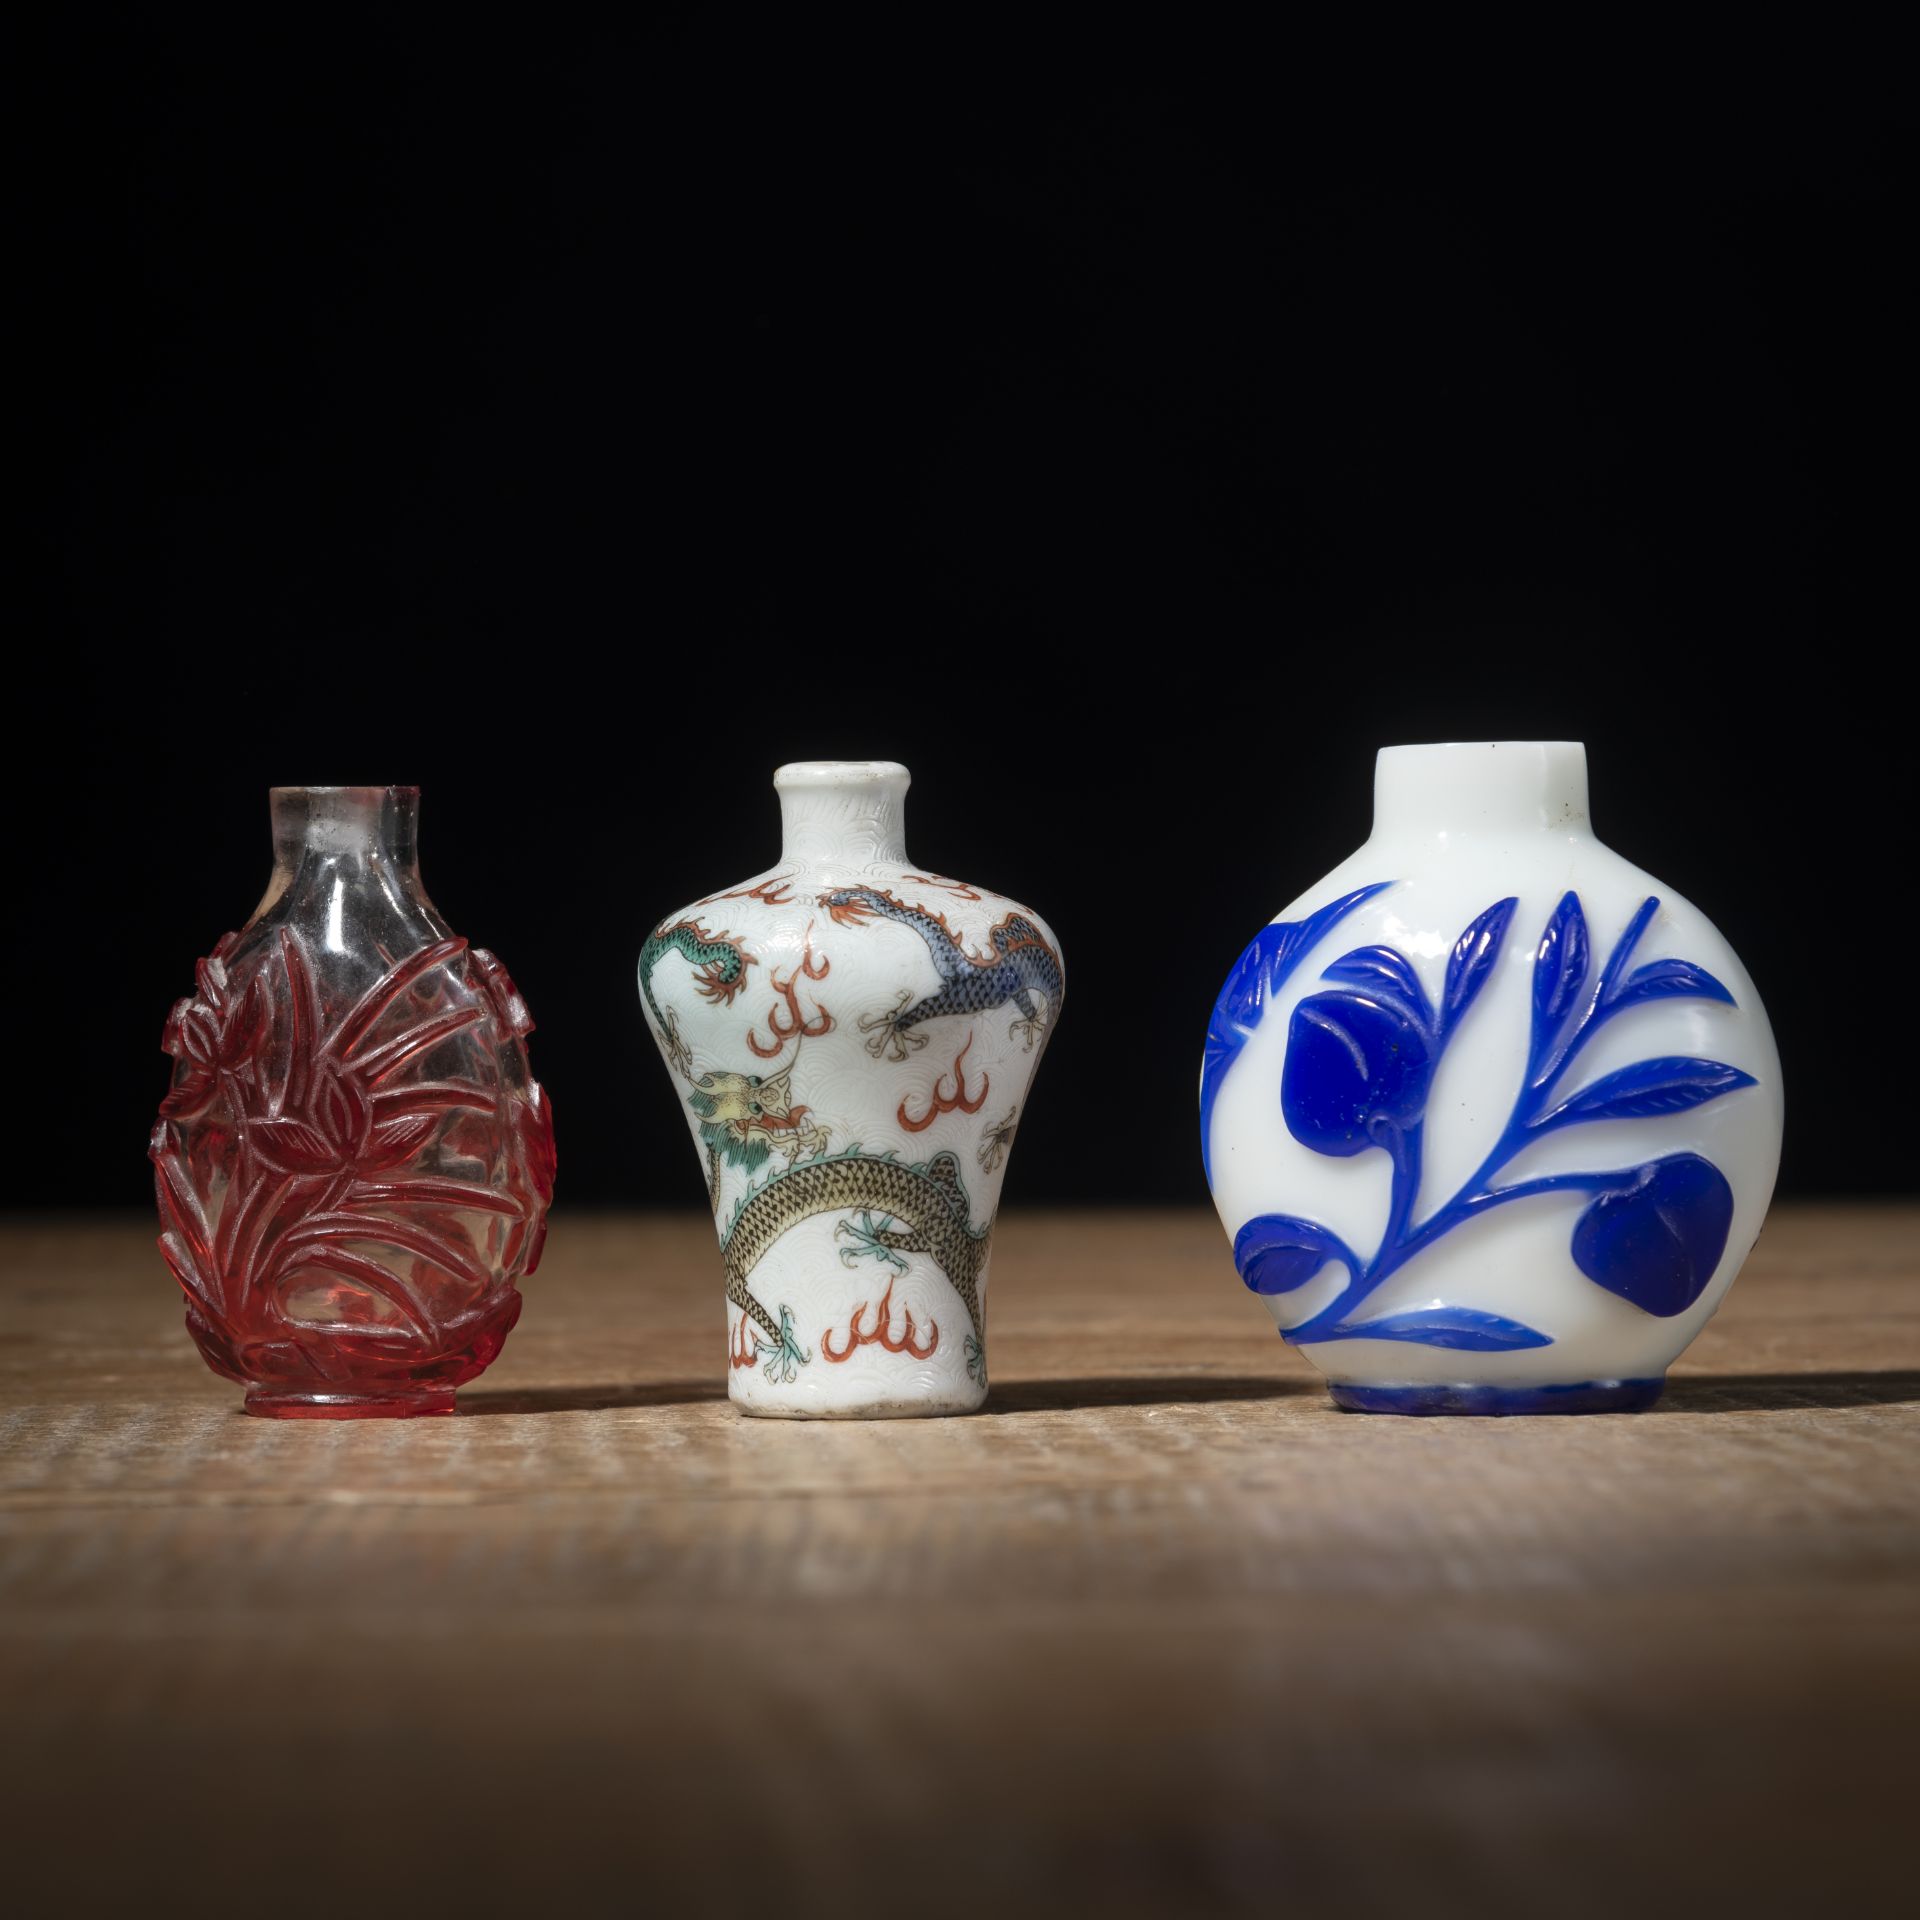 TWO RED- AND BLUE-OVERLAY BEIJING GLASS AND A POLYCHROME DRAGON PORCELAIN SNUFFBOTTLE